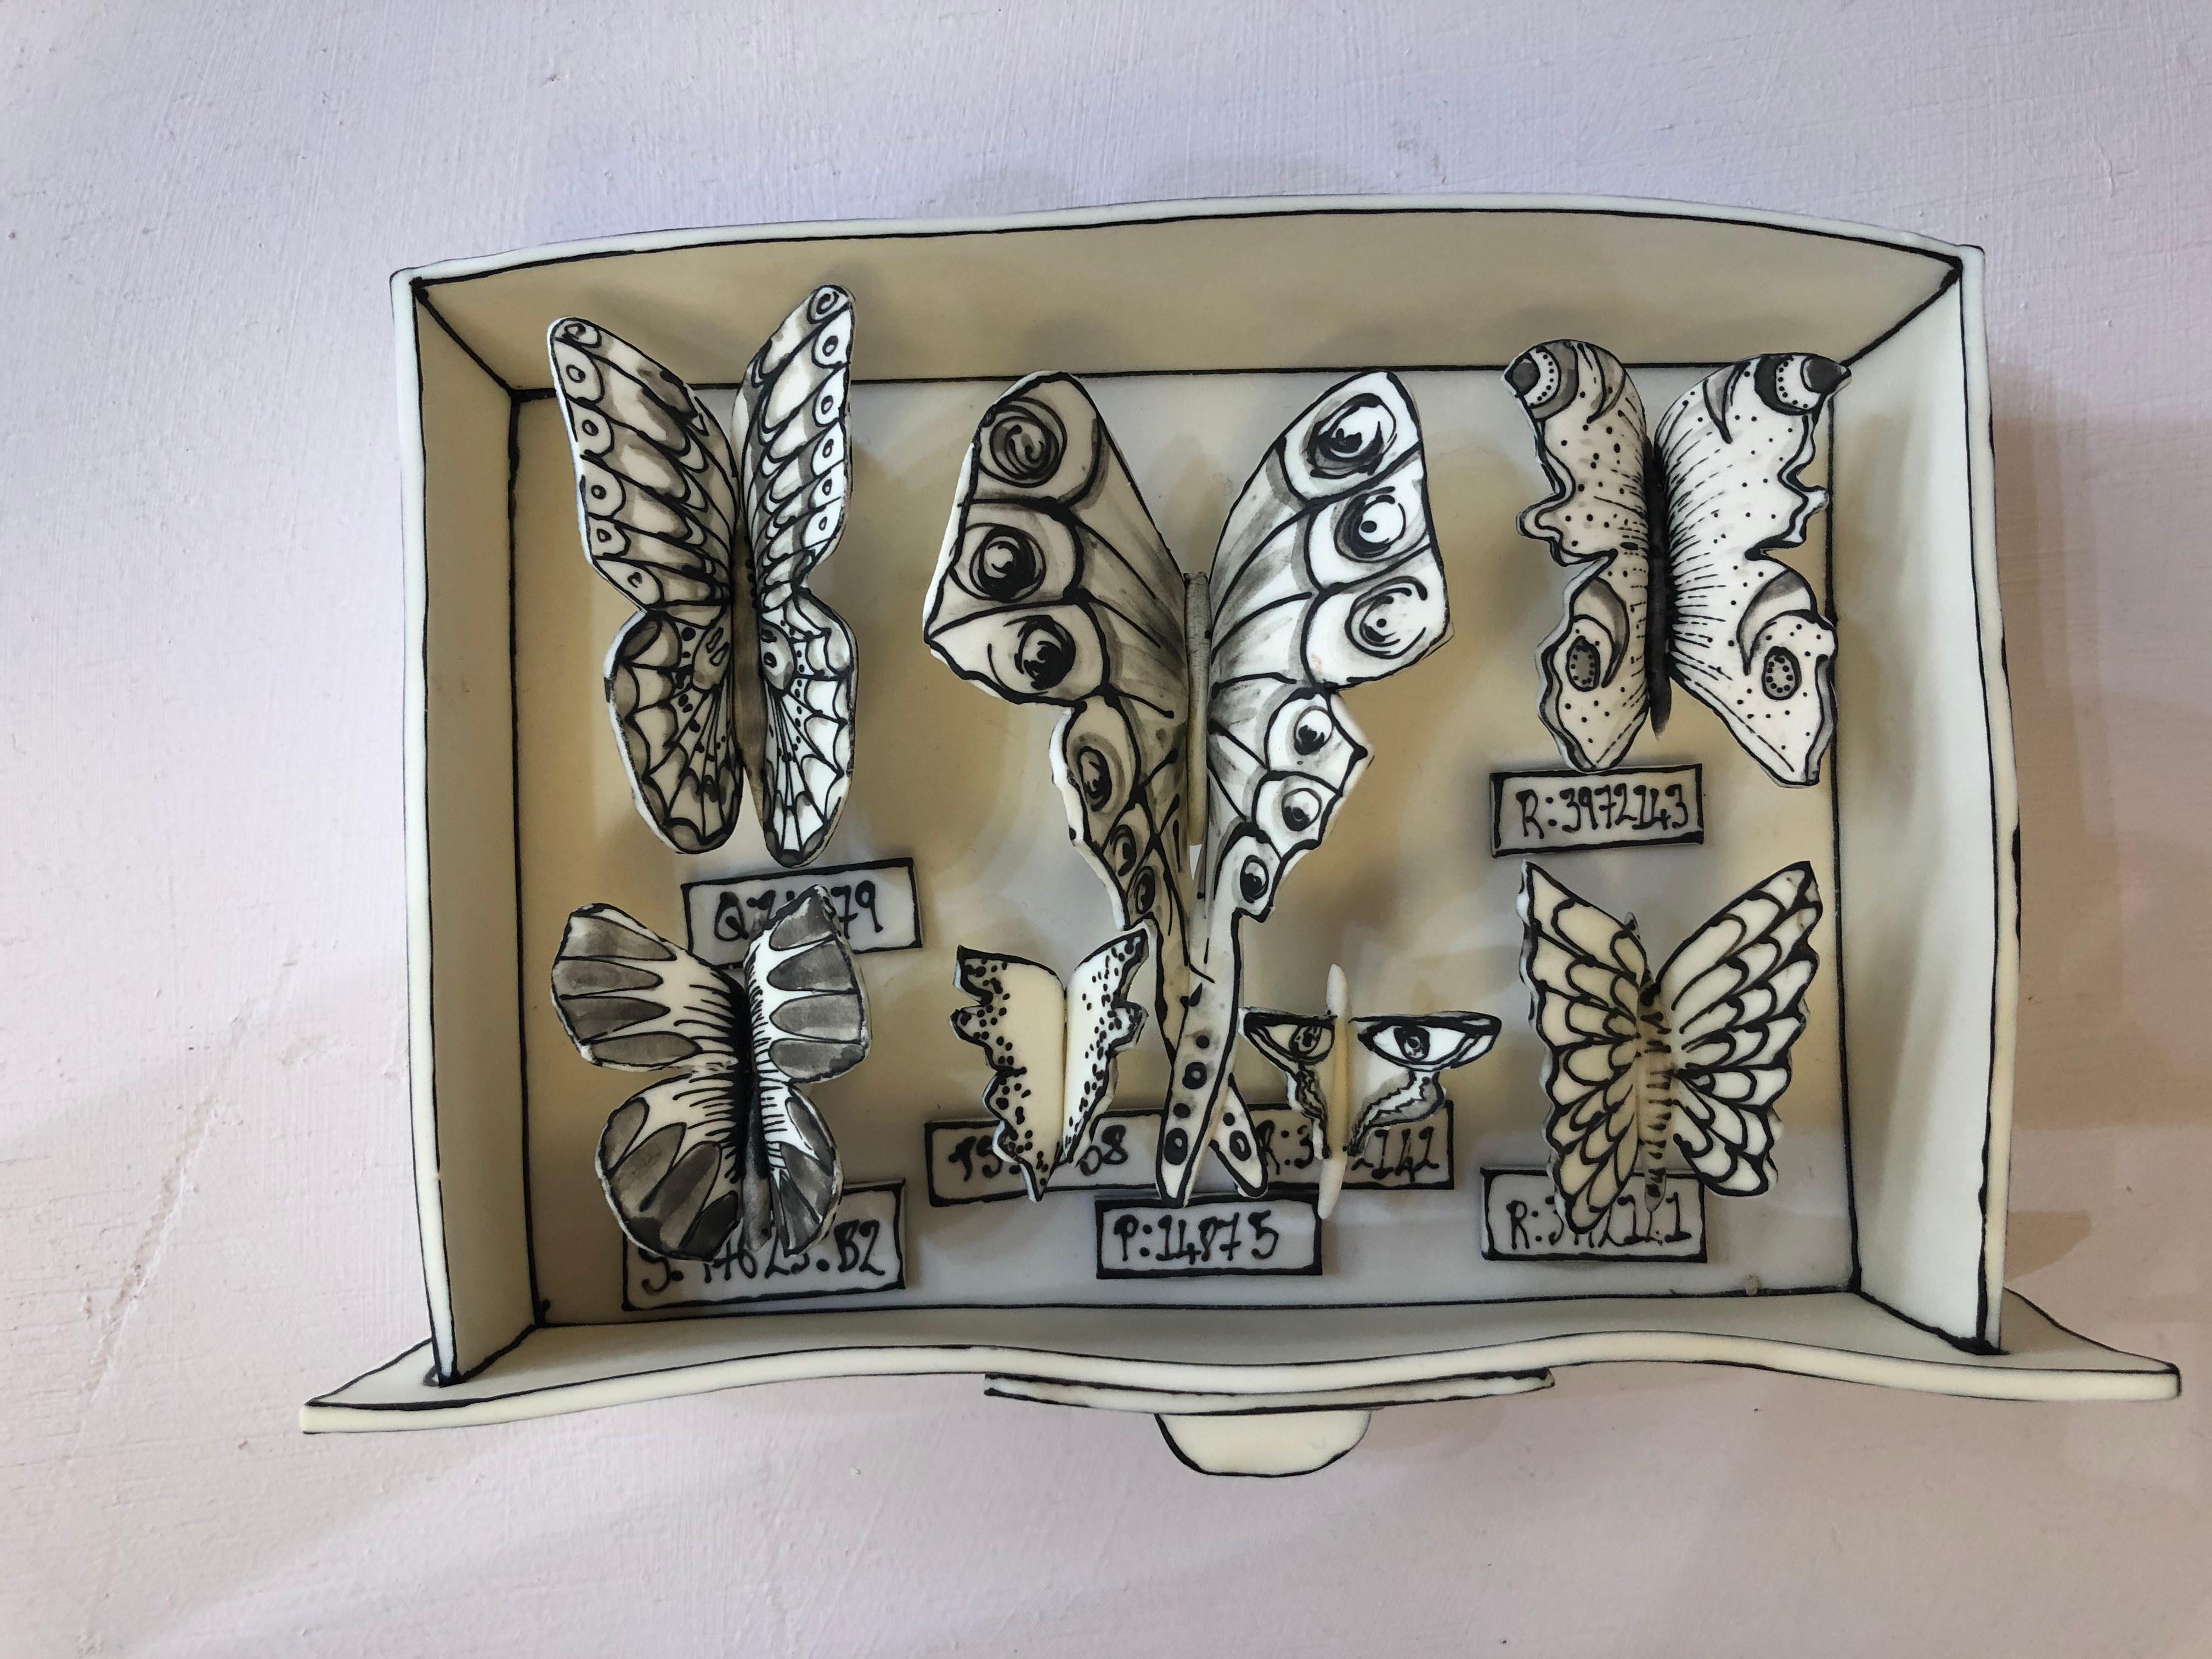 Katharine Morling Abstract Sculpture - "Butterfly box" porcelain and black stain ceramic sculpture